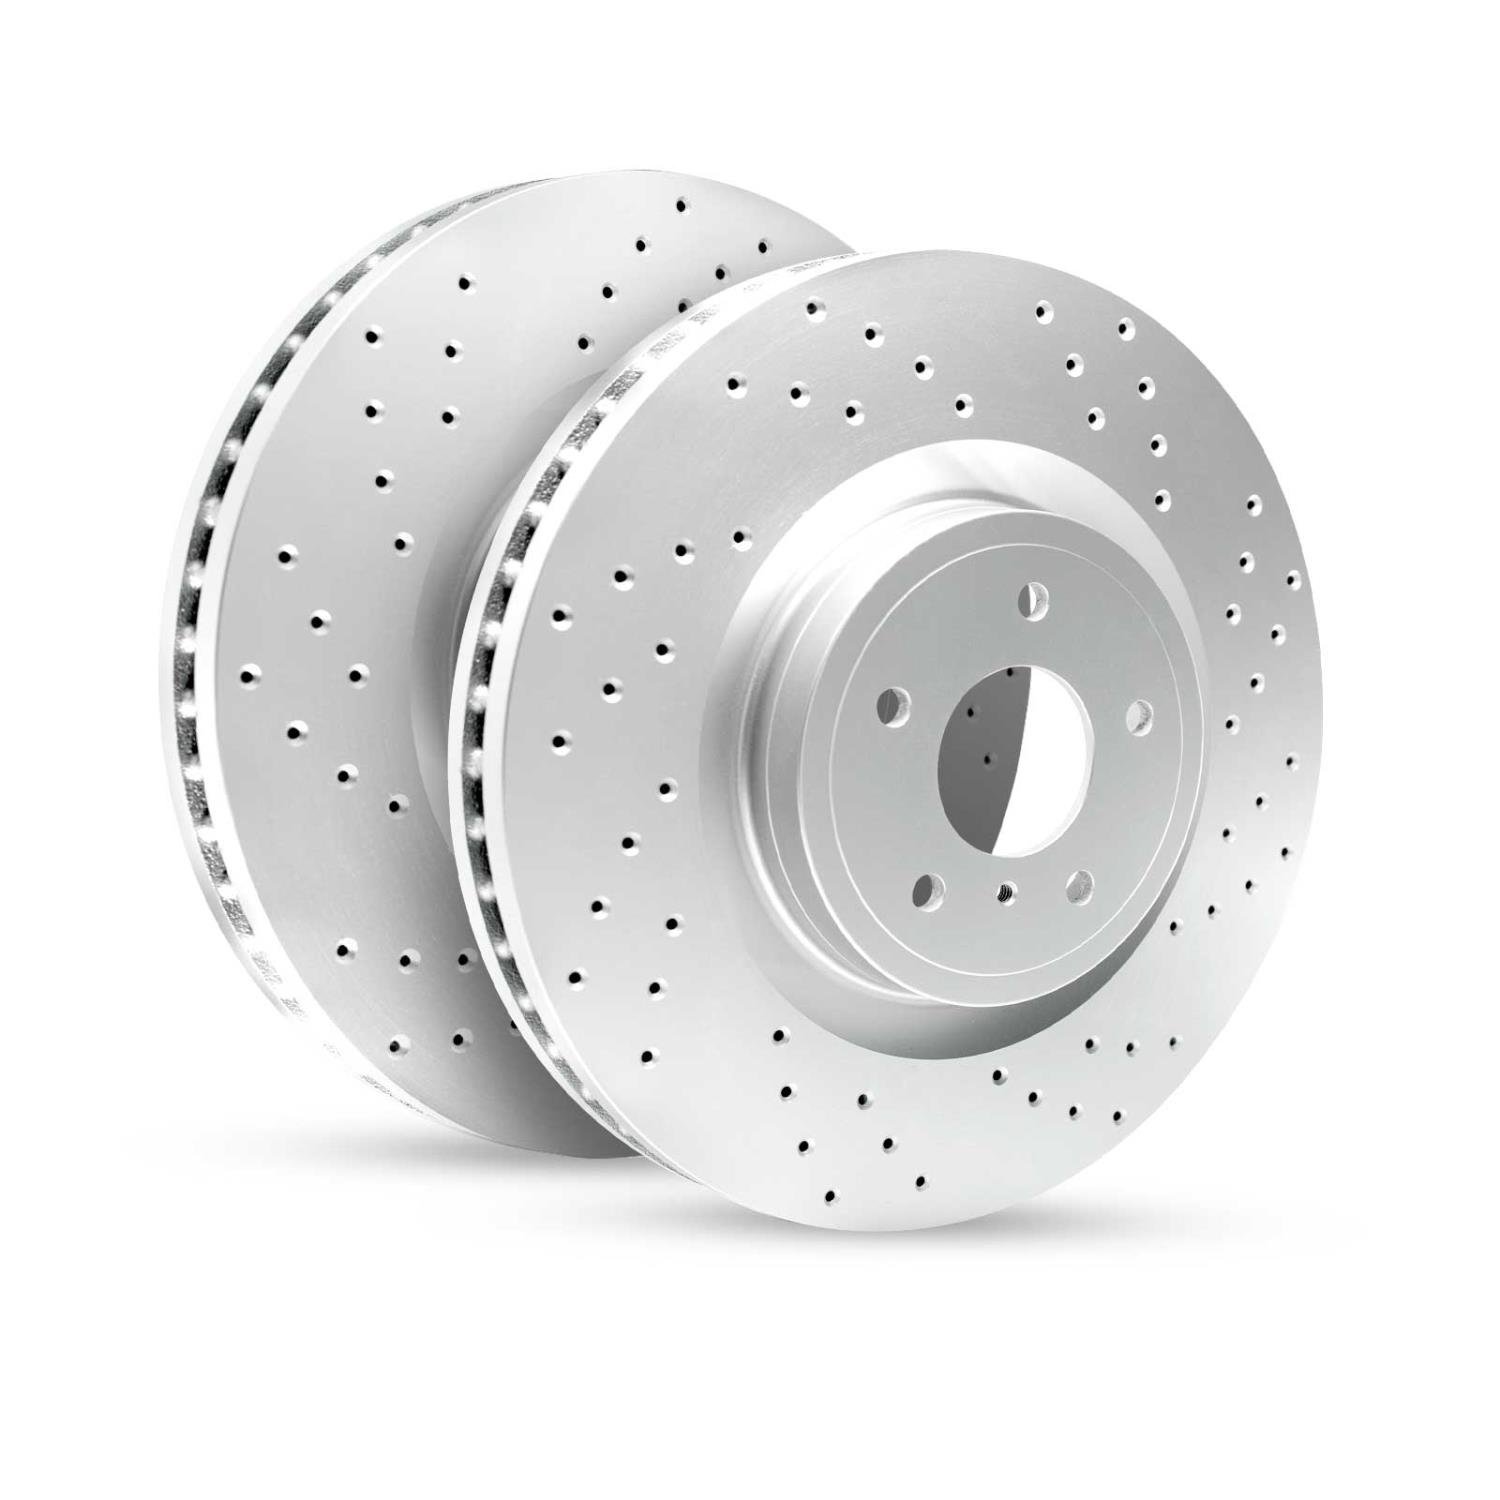 GEO-Carbon Drilled/Slotted Rotors, 1999-2005 Ford/Mazda,